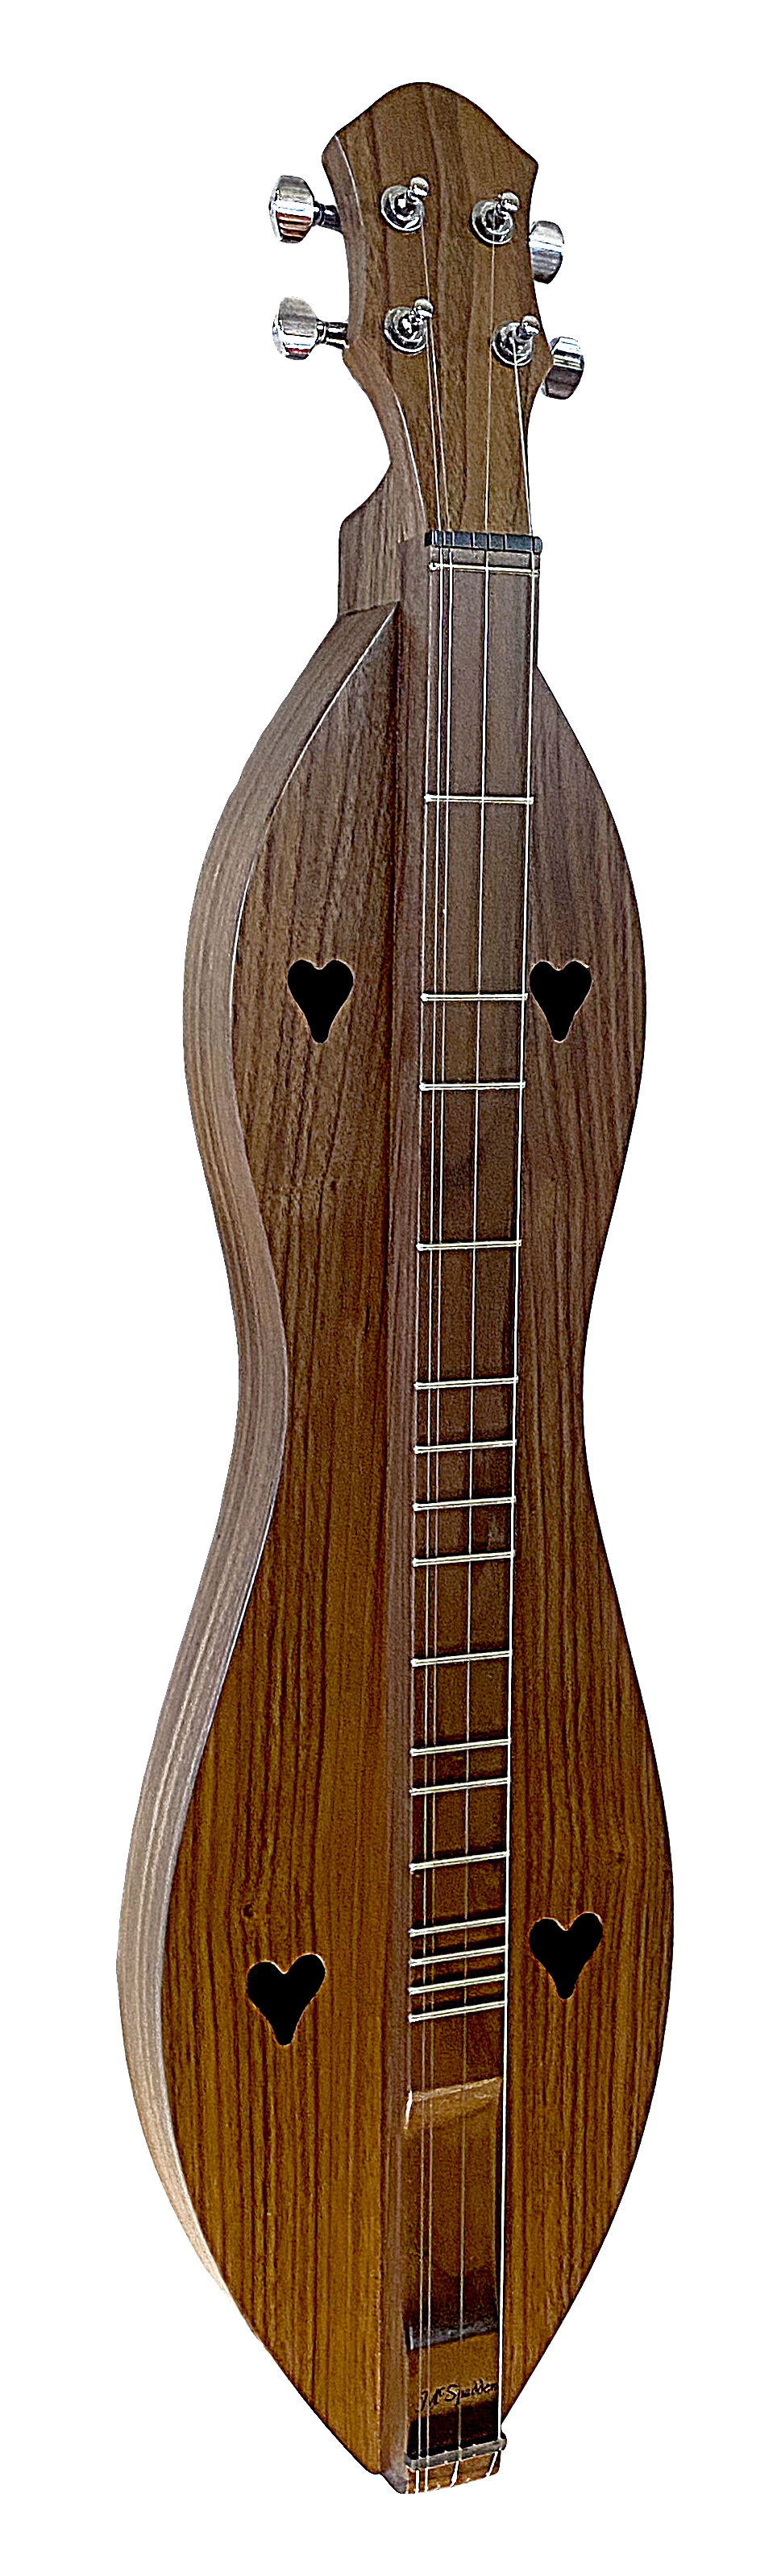 A 4 String Ginger, Flathead Hourglass with Walnut back, sides and top (4FGWW) ukulele on a white background with a padded teal nylon case.